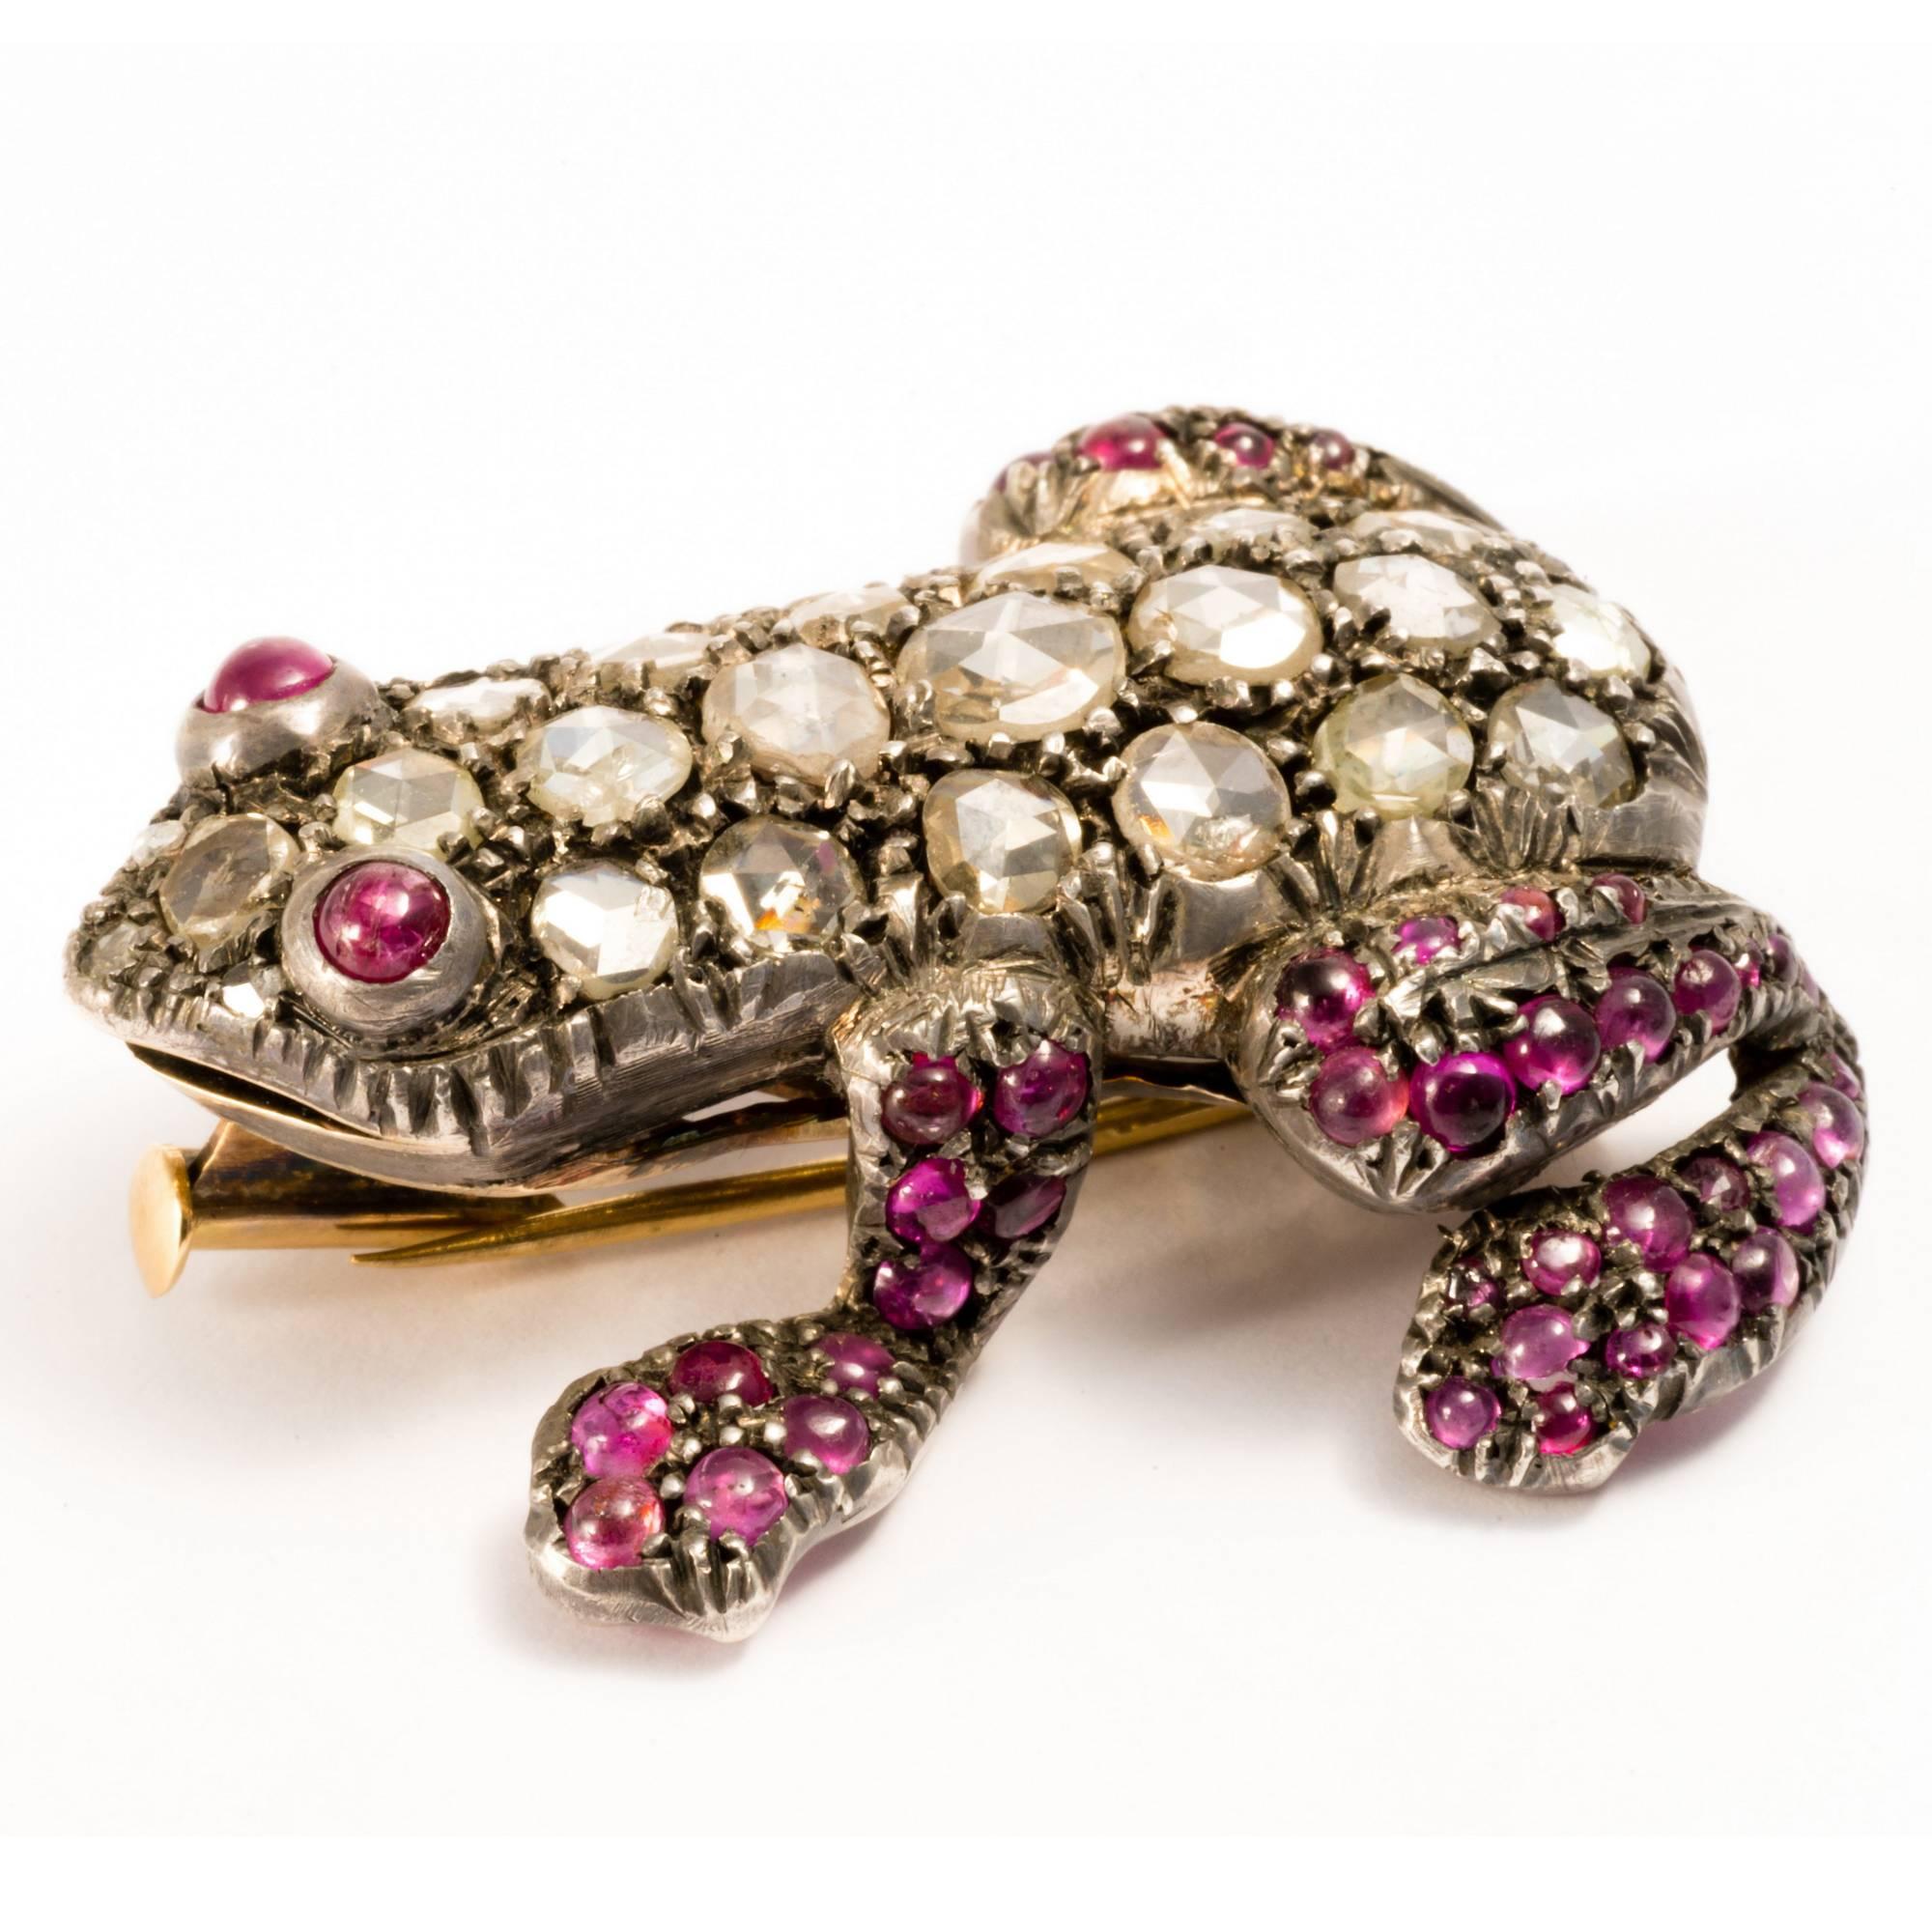 Late Victorian 1880 Antique Symbol Rose Cut Diamonds and Rubies Frog Necklace Enhancer Brooch 